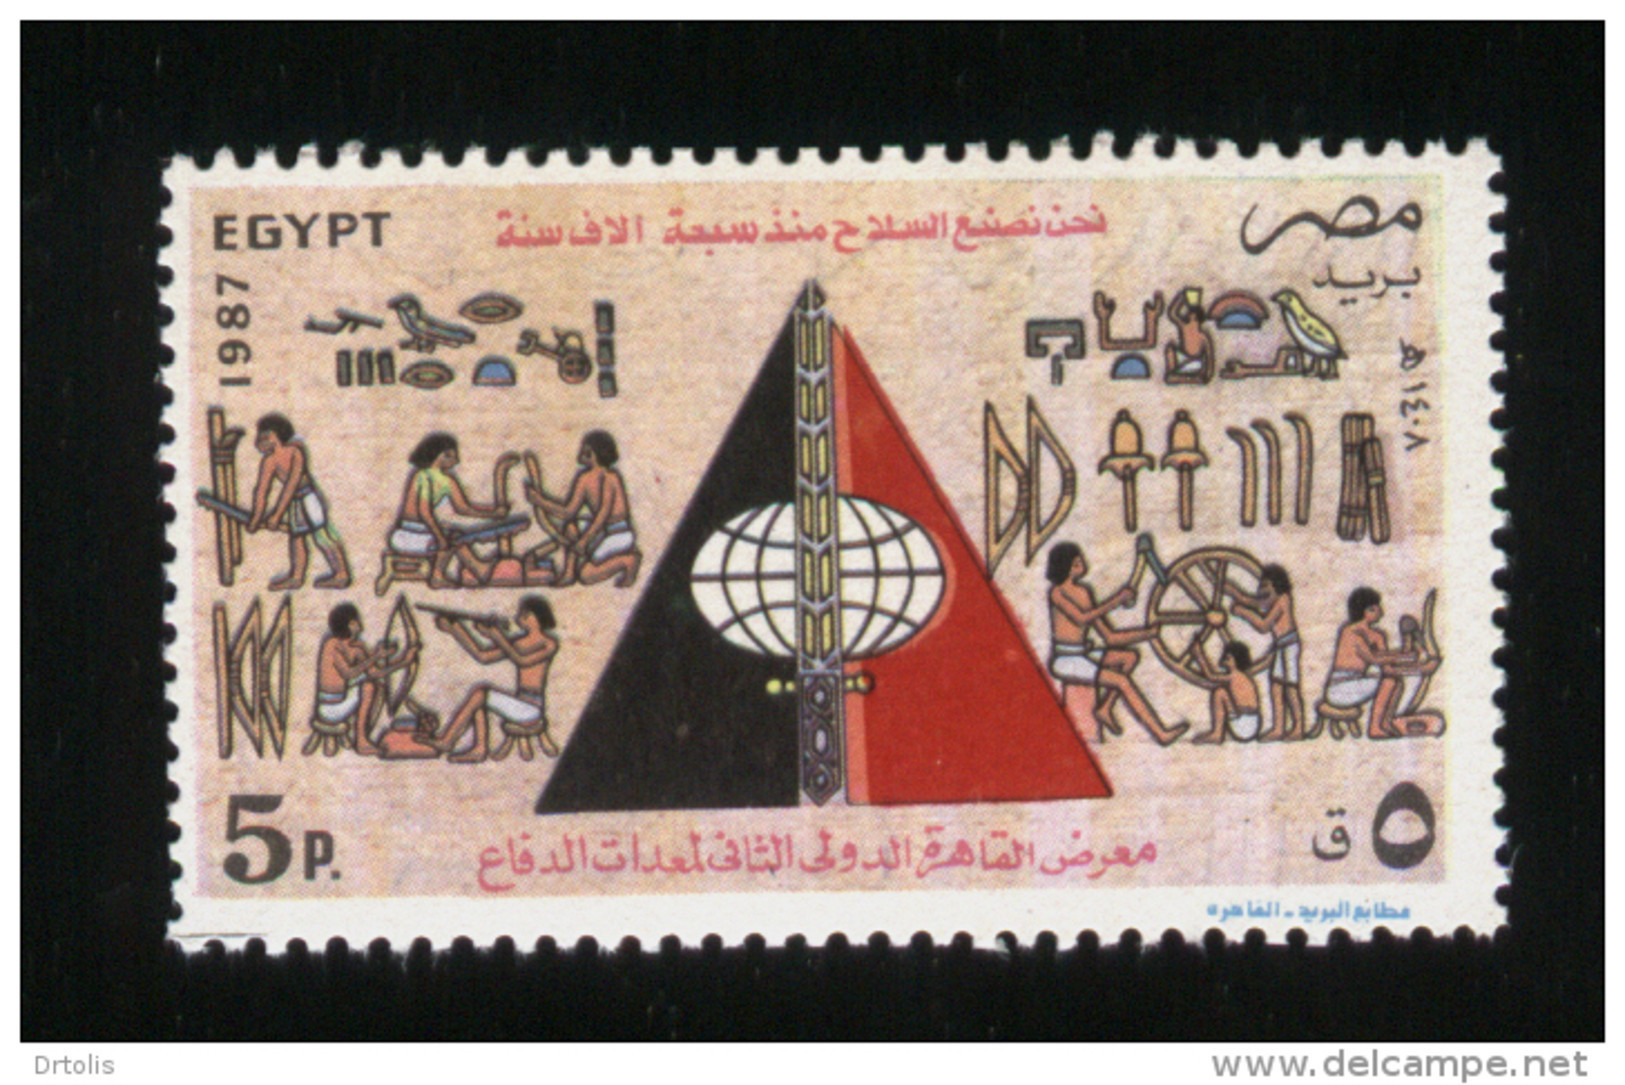 EGYPT / 1987 / INTL. DEFENCE EQUIPMENT EXHIBITION / ANCIENT EGYPTIANS MAKING WEAPONS / MNH / VF - Neufs